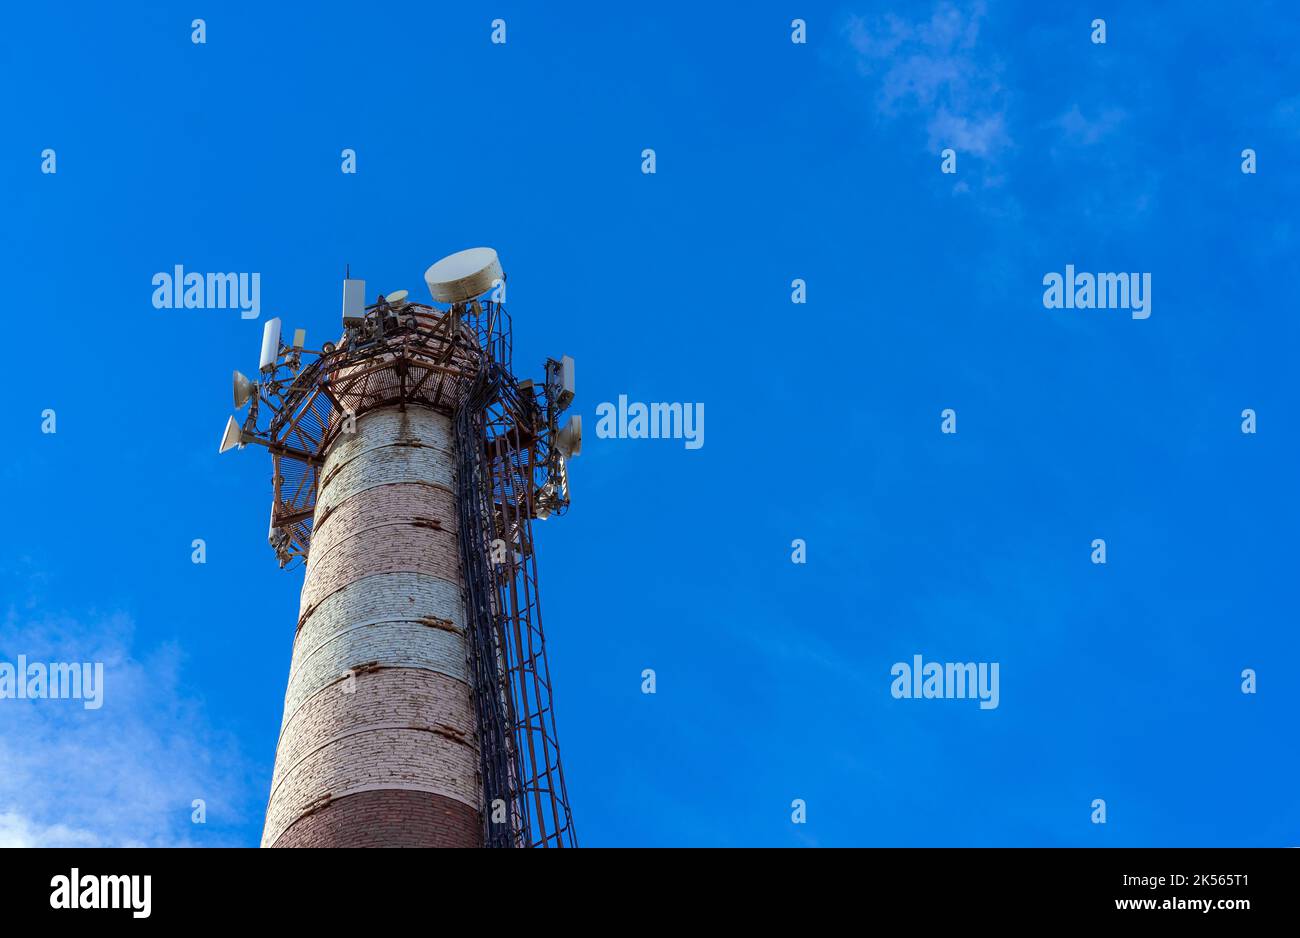 Telecommunications tower with cellular network antennas against the blue sky. Stock Photo